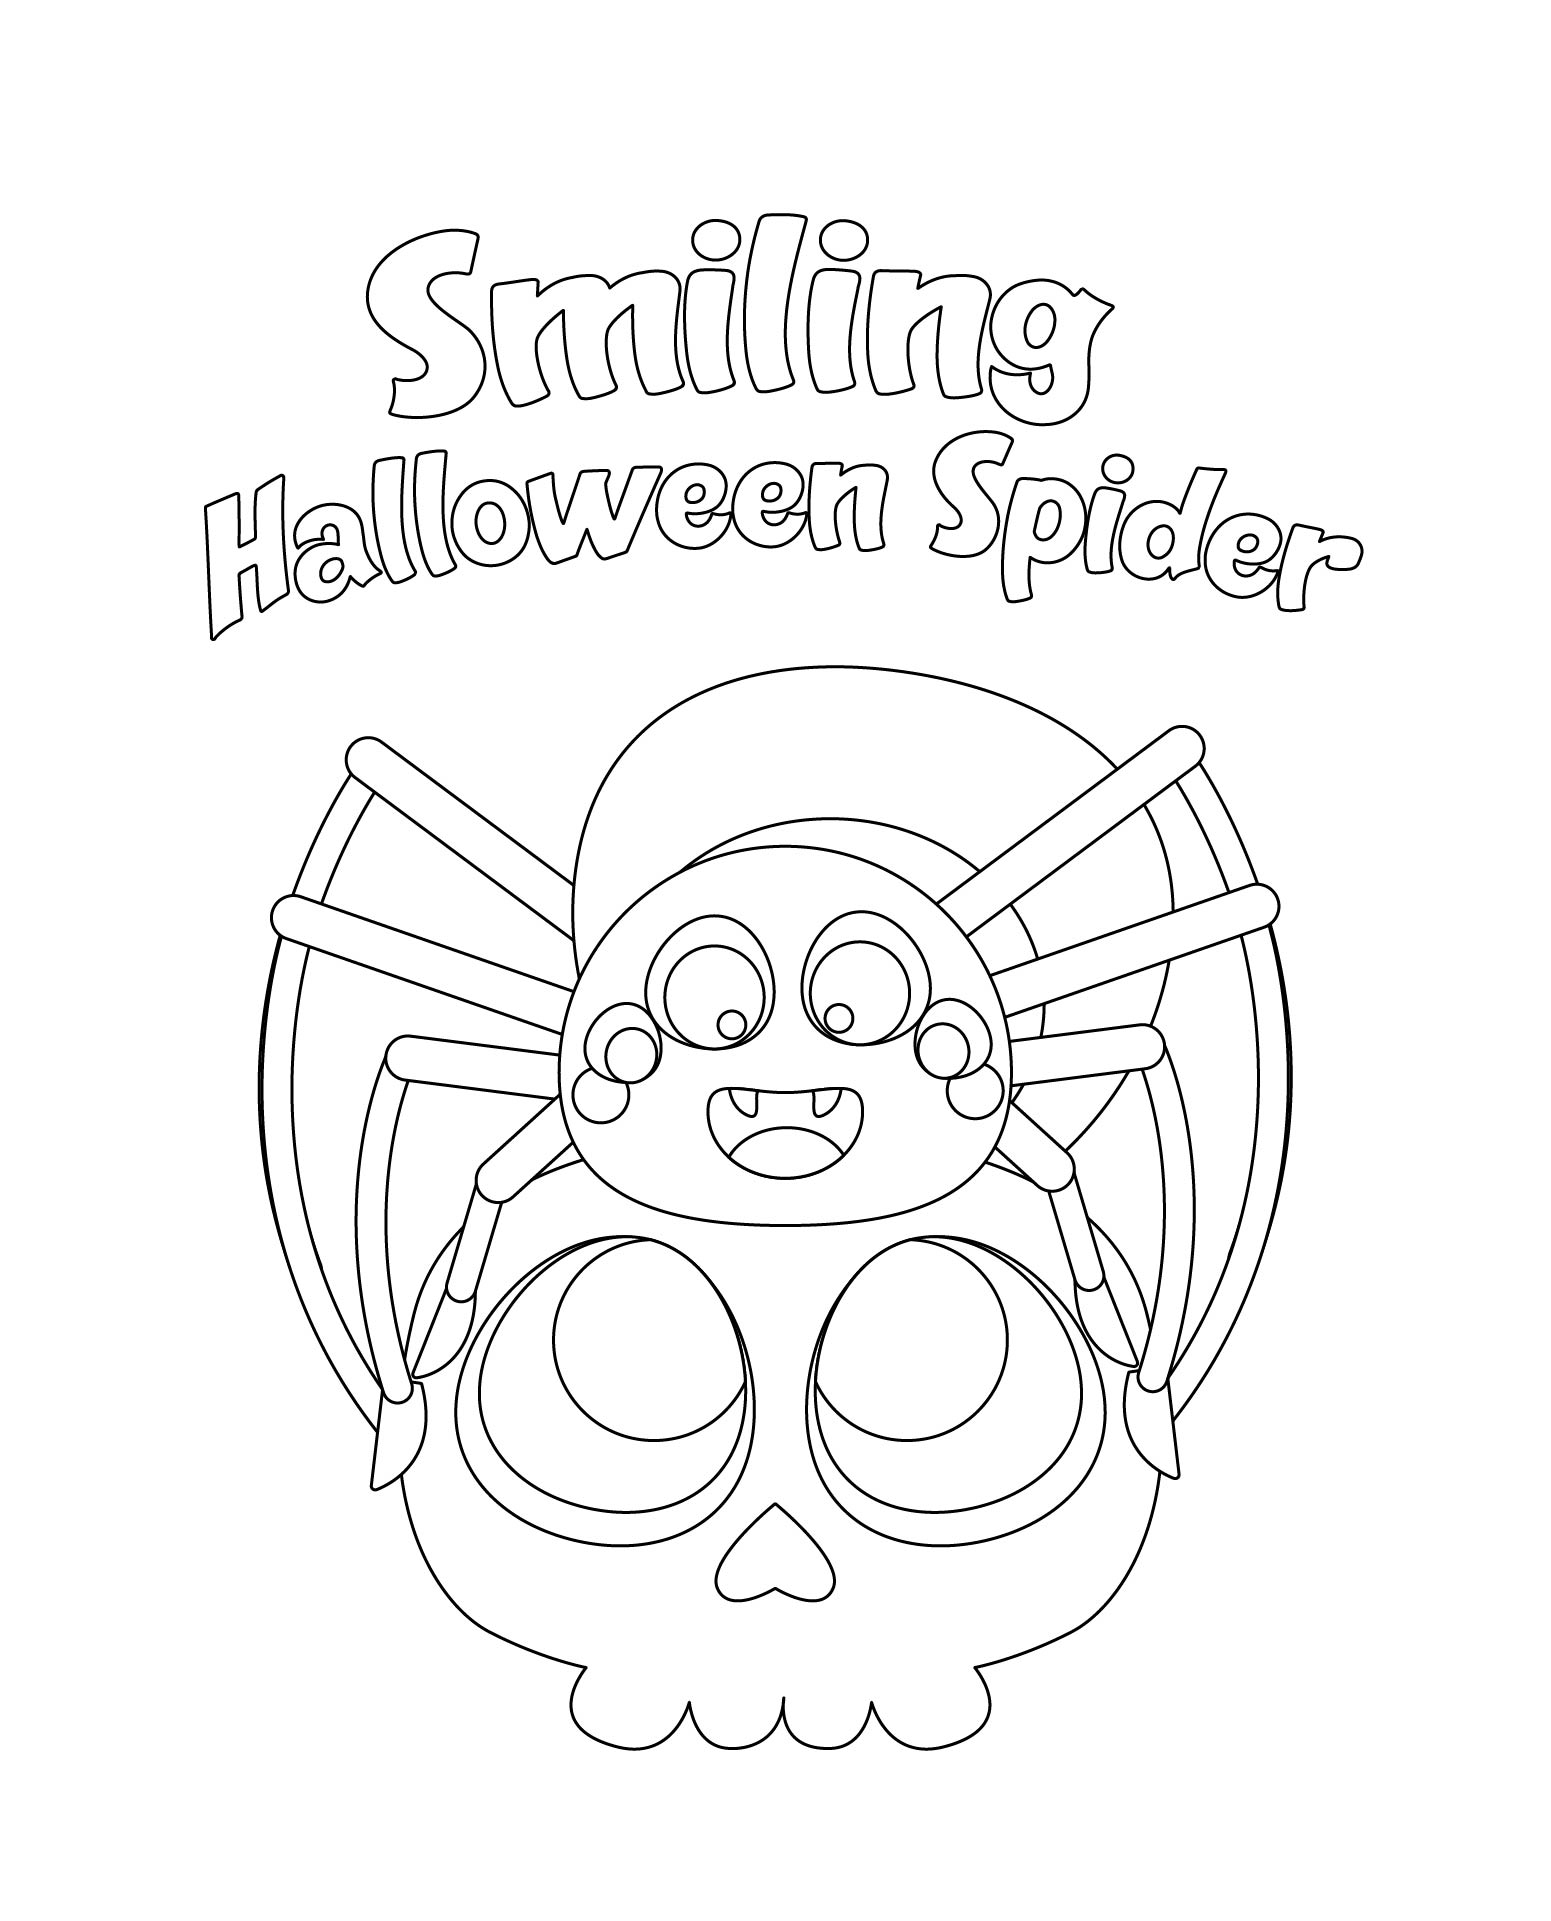 Smiling Halloween Spider Coloring Page Printable